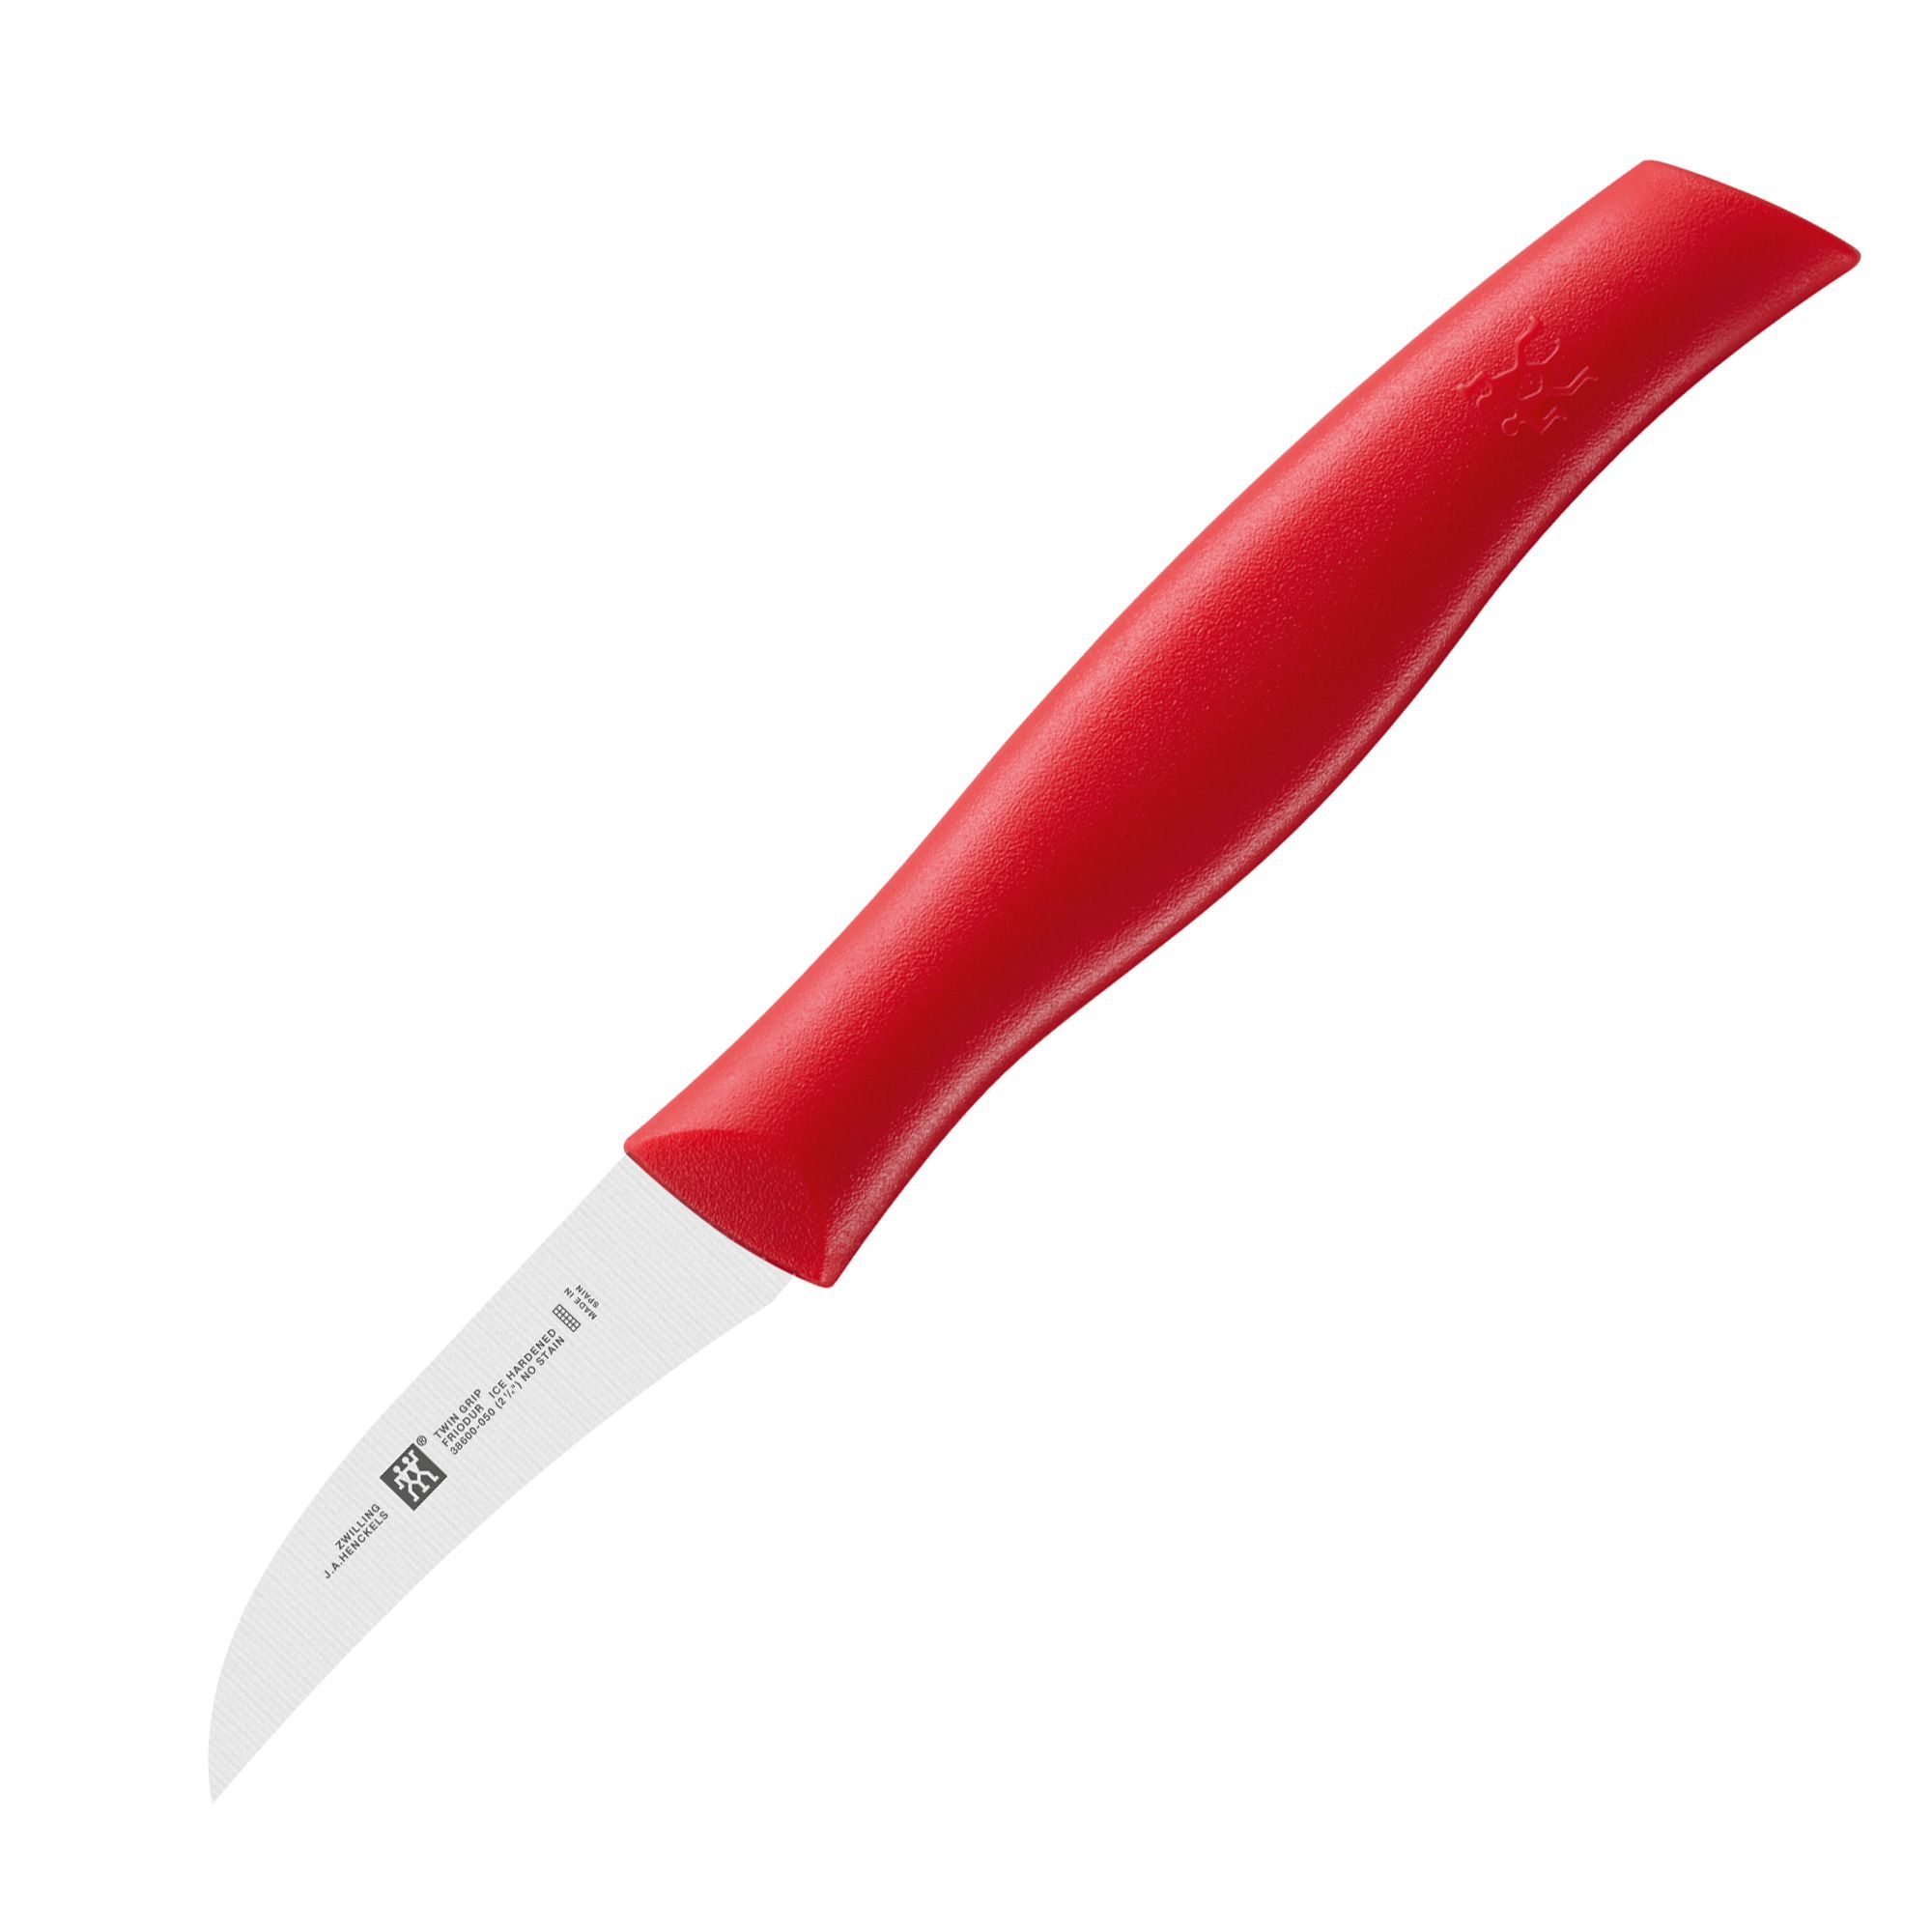 Zwilling - TWIN Grip XS  paring knife 5cm, red